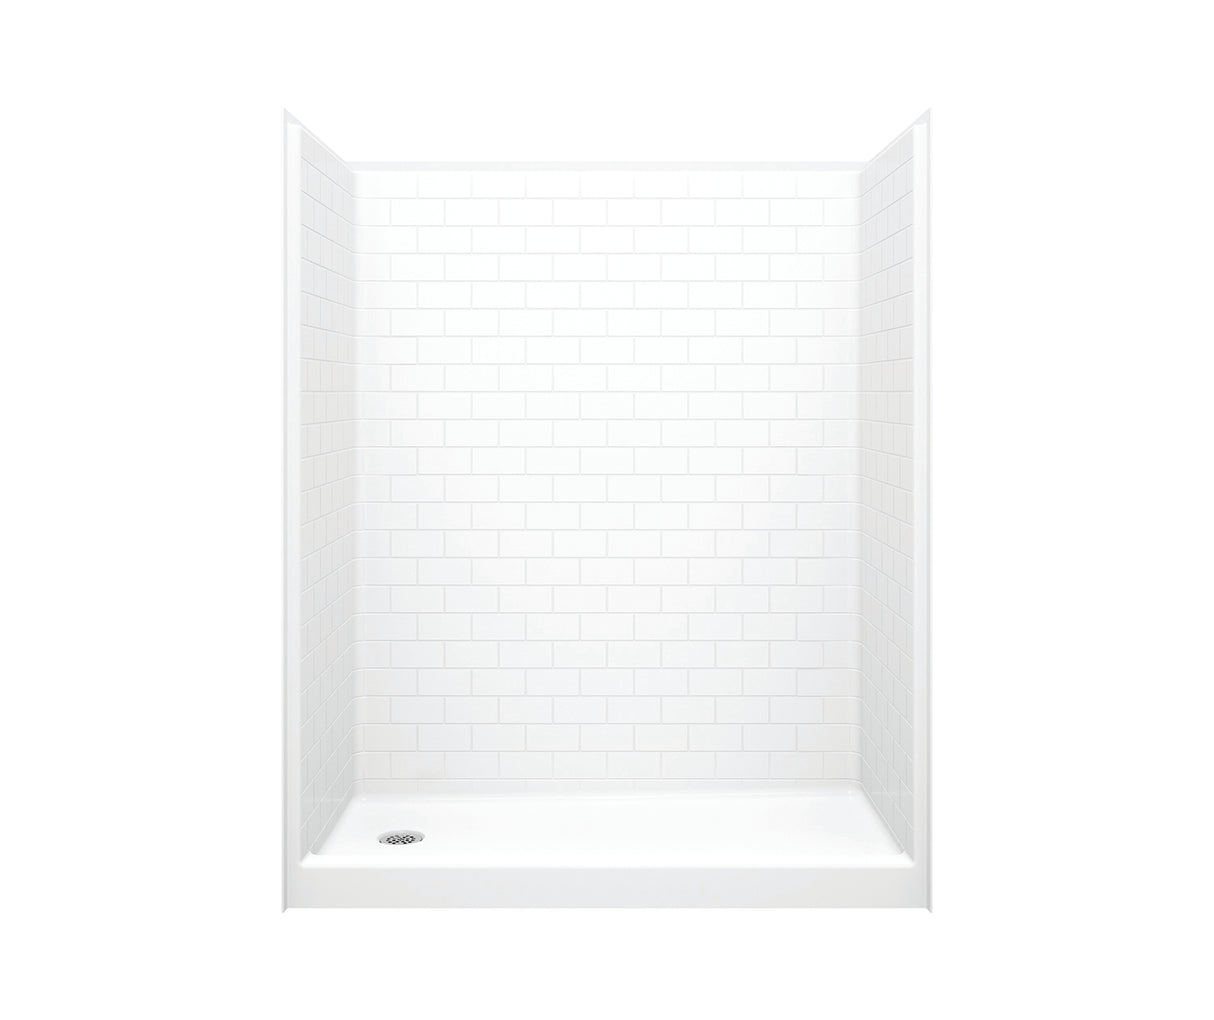 Aker 16030STT AcrylX Alcove Left-Hand Drain One-Piece Shower in White